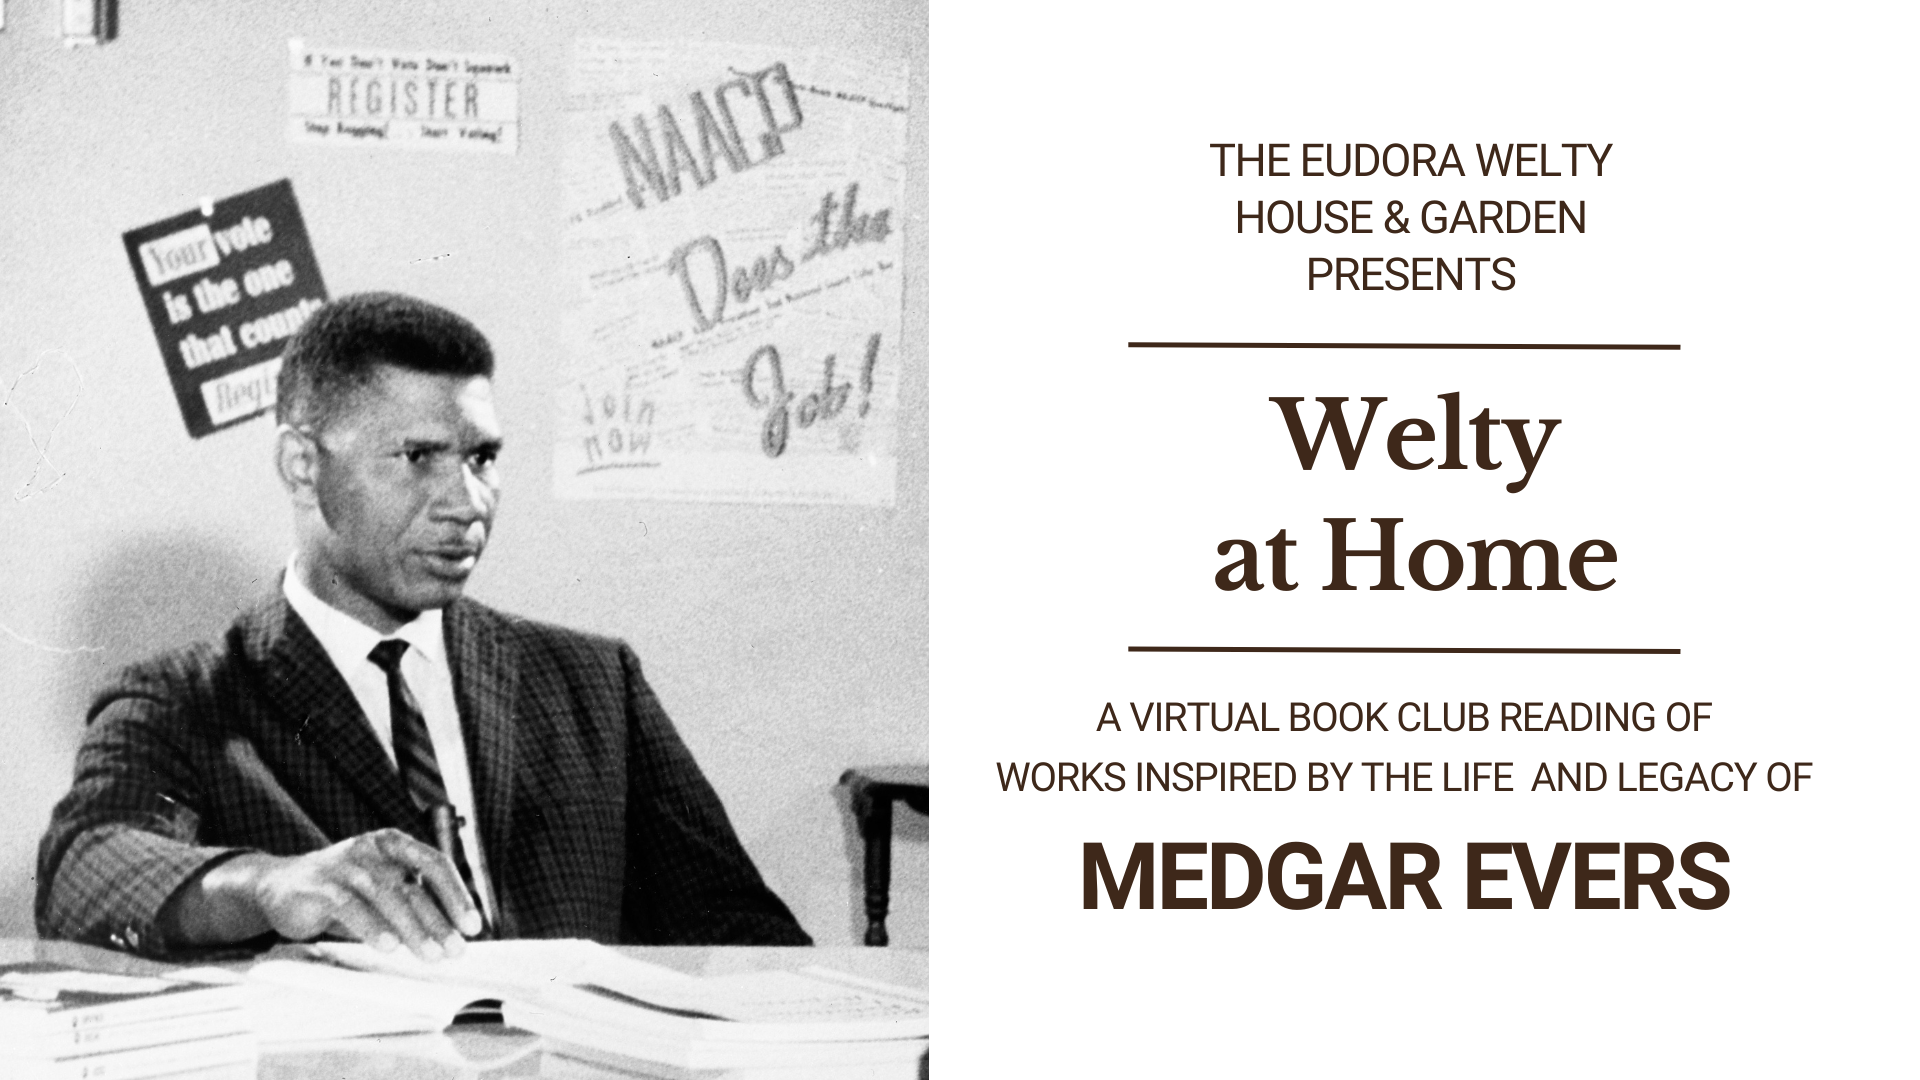 Black and white photograph of Medgar Evers in a suit and tie at his desk next to information on Book Club